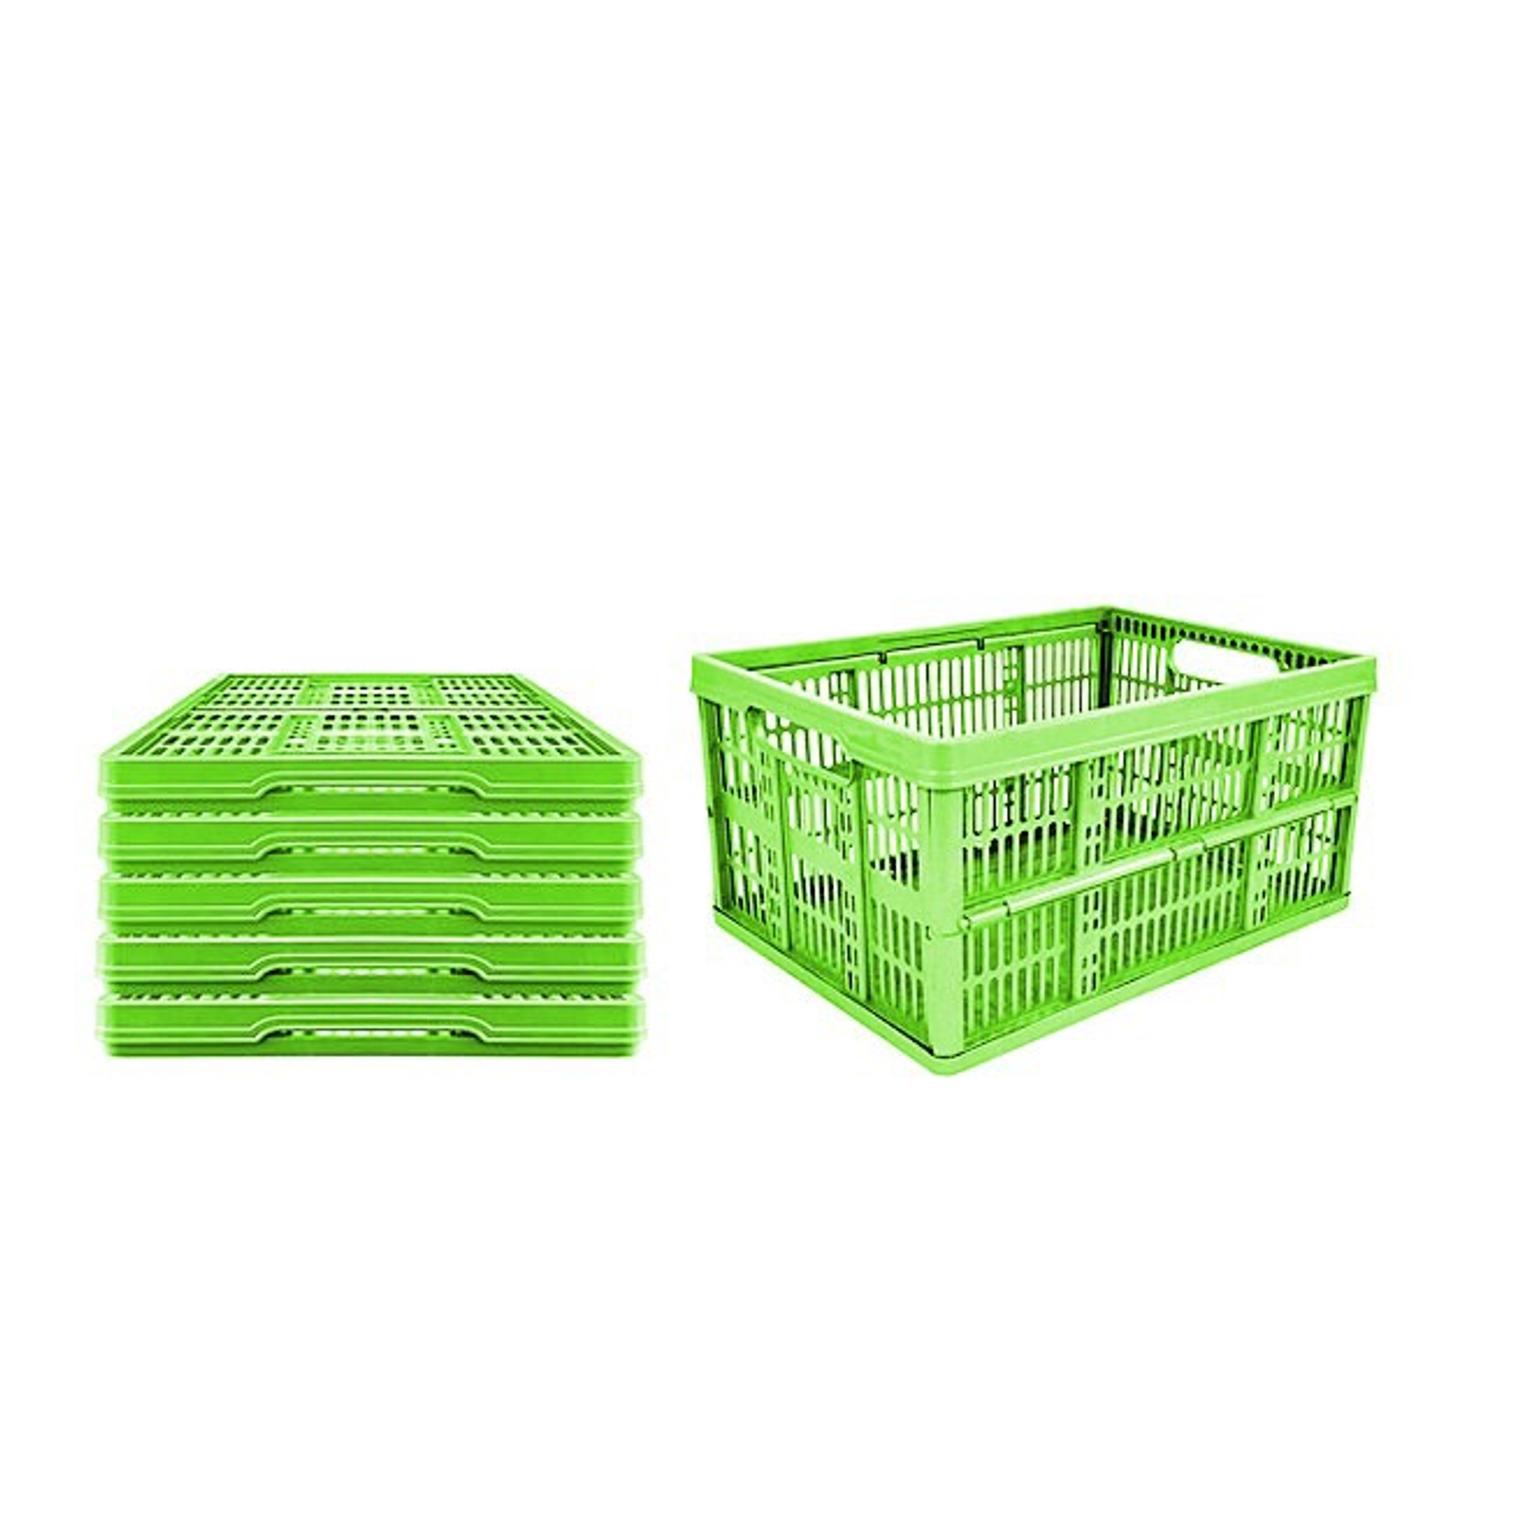 32L Plastic Folding Storage Container Basket Crate Box Stack Foldable Portable